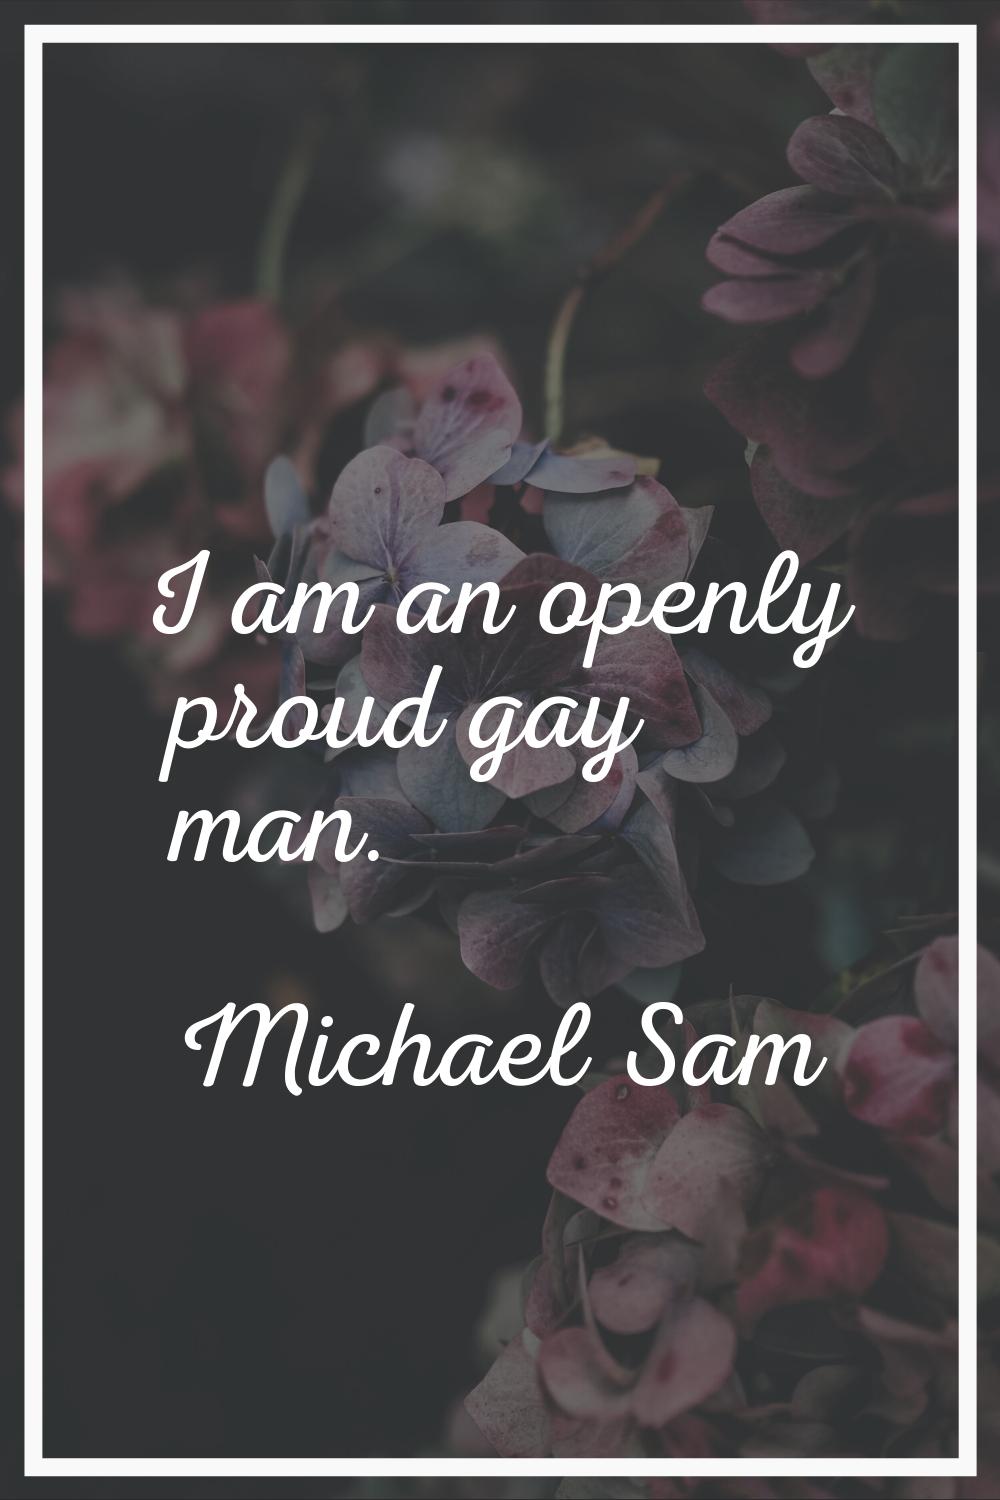 I am an openly proud gay man.